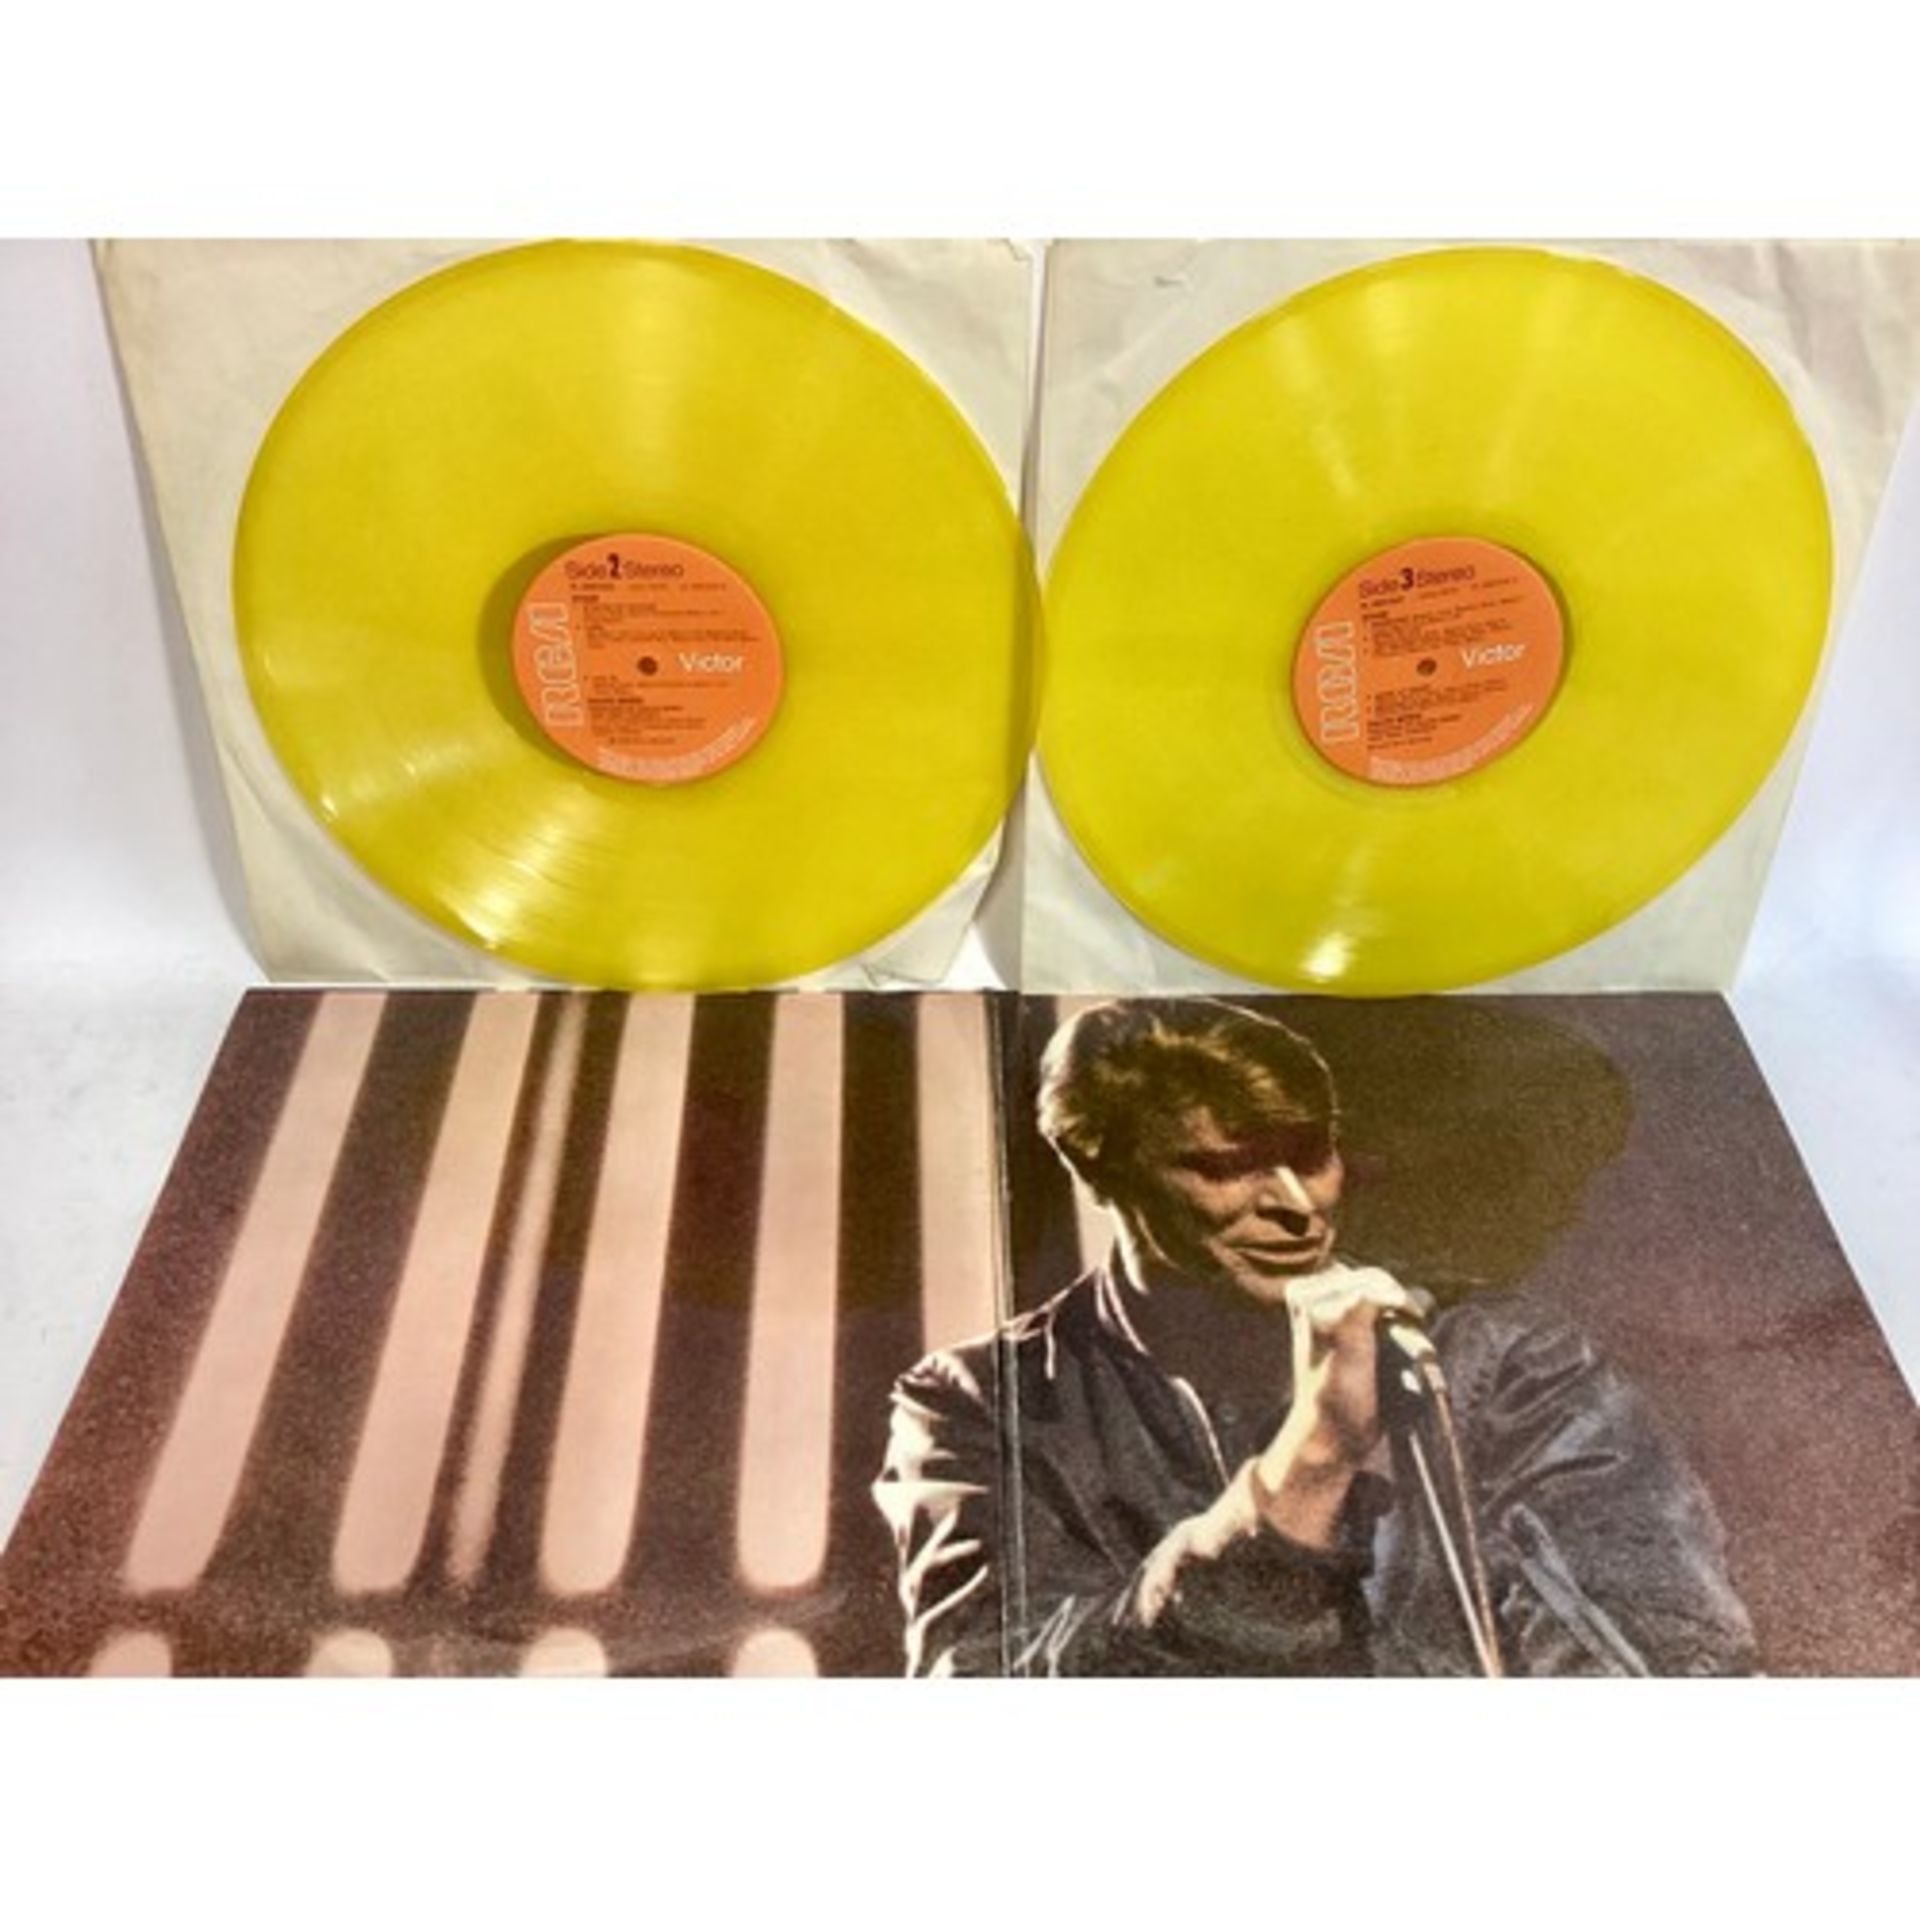 DAVID BOWIE DOUBLE ALBUM ‘STAGE’ ON YELLOW VINYL PRESSING. - Image 3 of 3